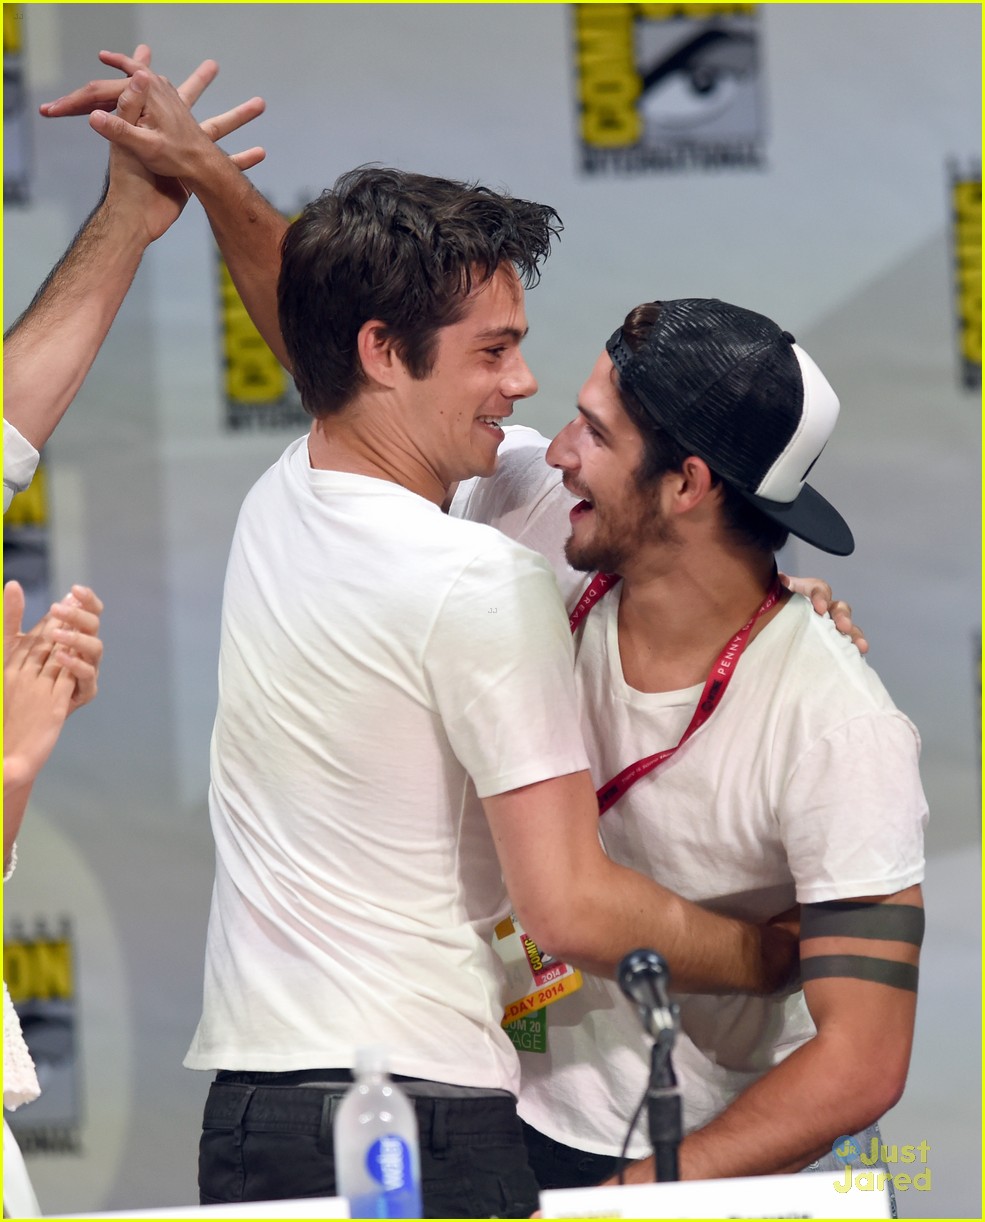 tyler posey dylan obrien sdcc reunion 14